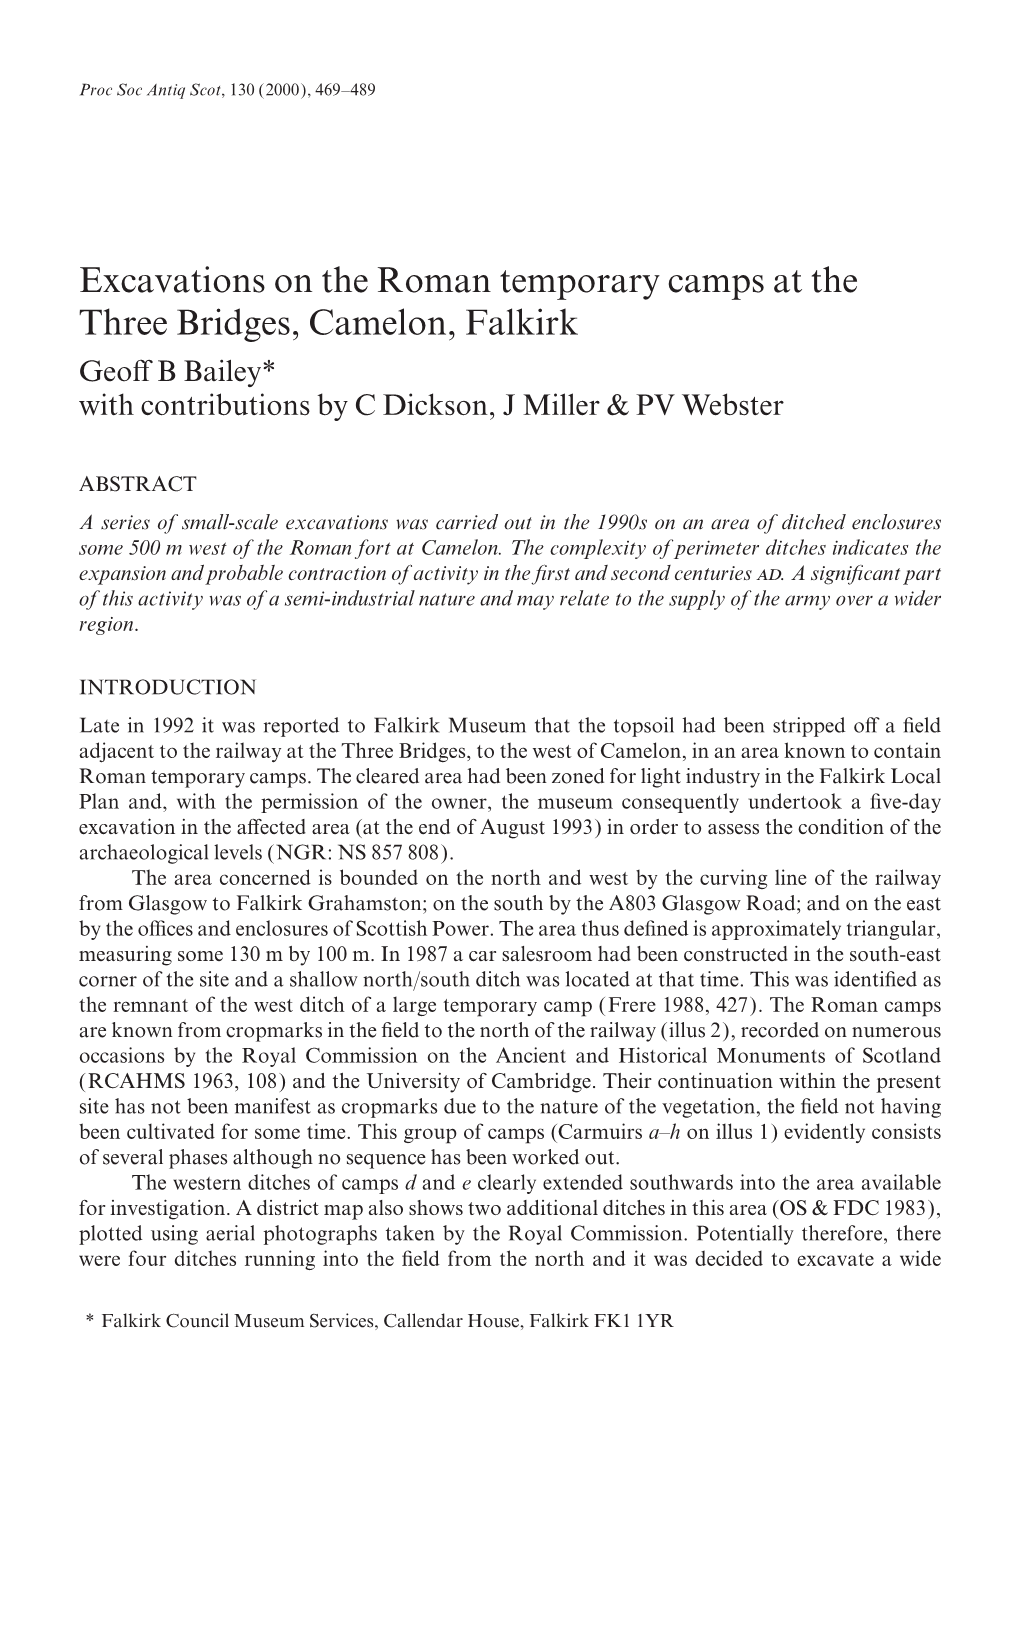 Excavations on the Roman Temporary Camps at the Three Bridges, Camelon, Falkirk Geoﬀ B Bailey* with Contributions by C Dickson, J Miller & PV Webster